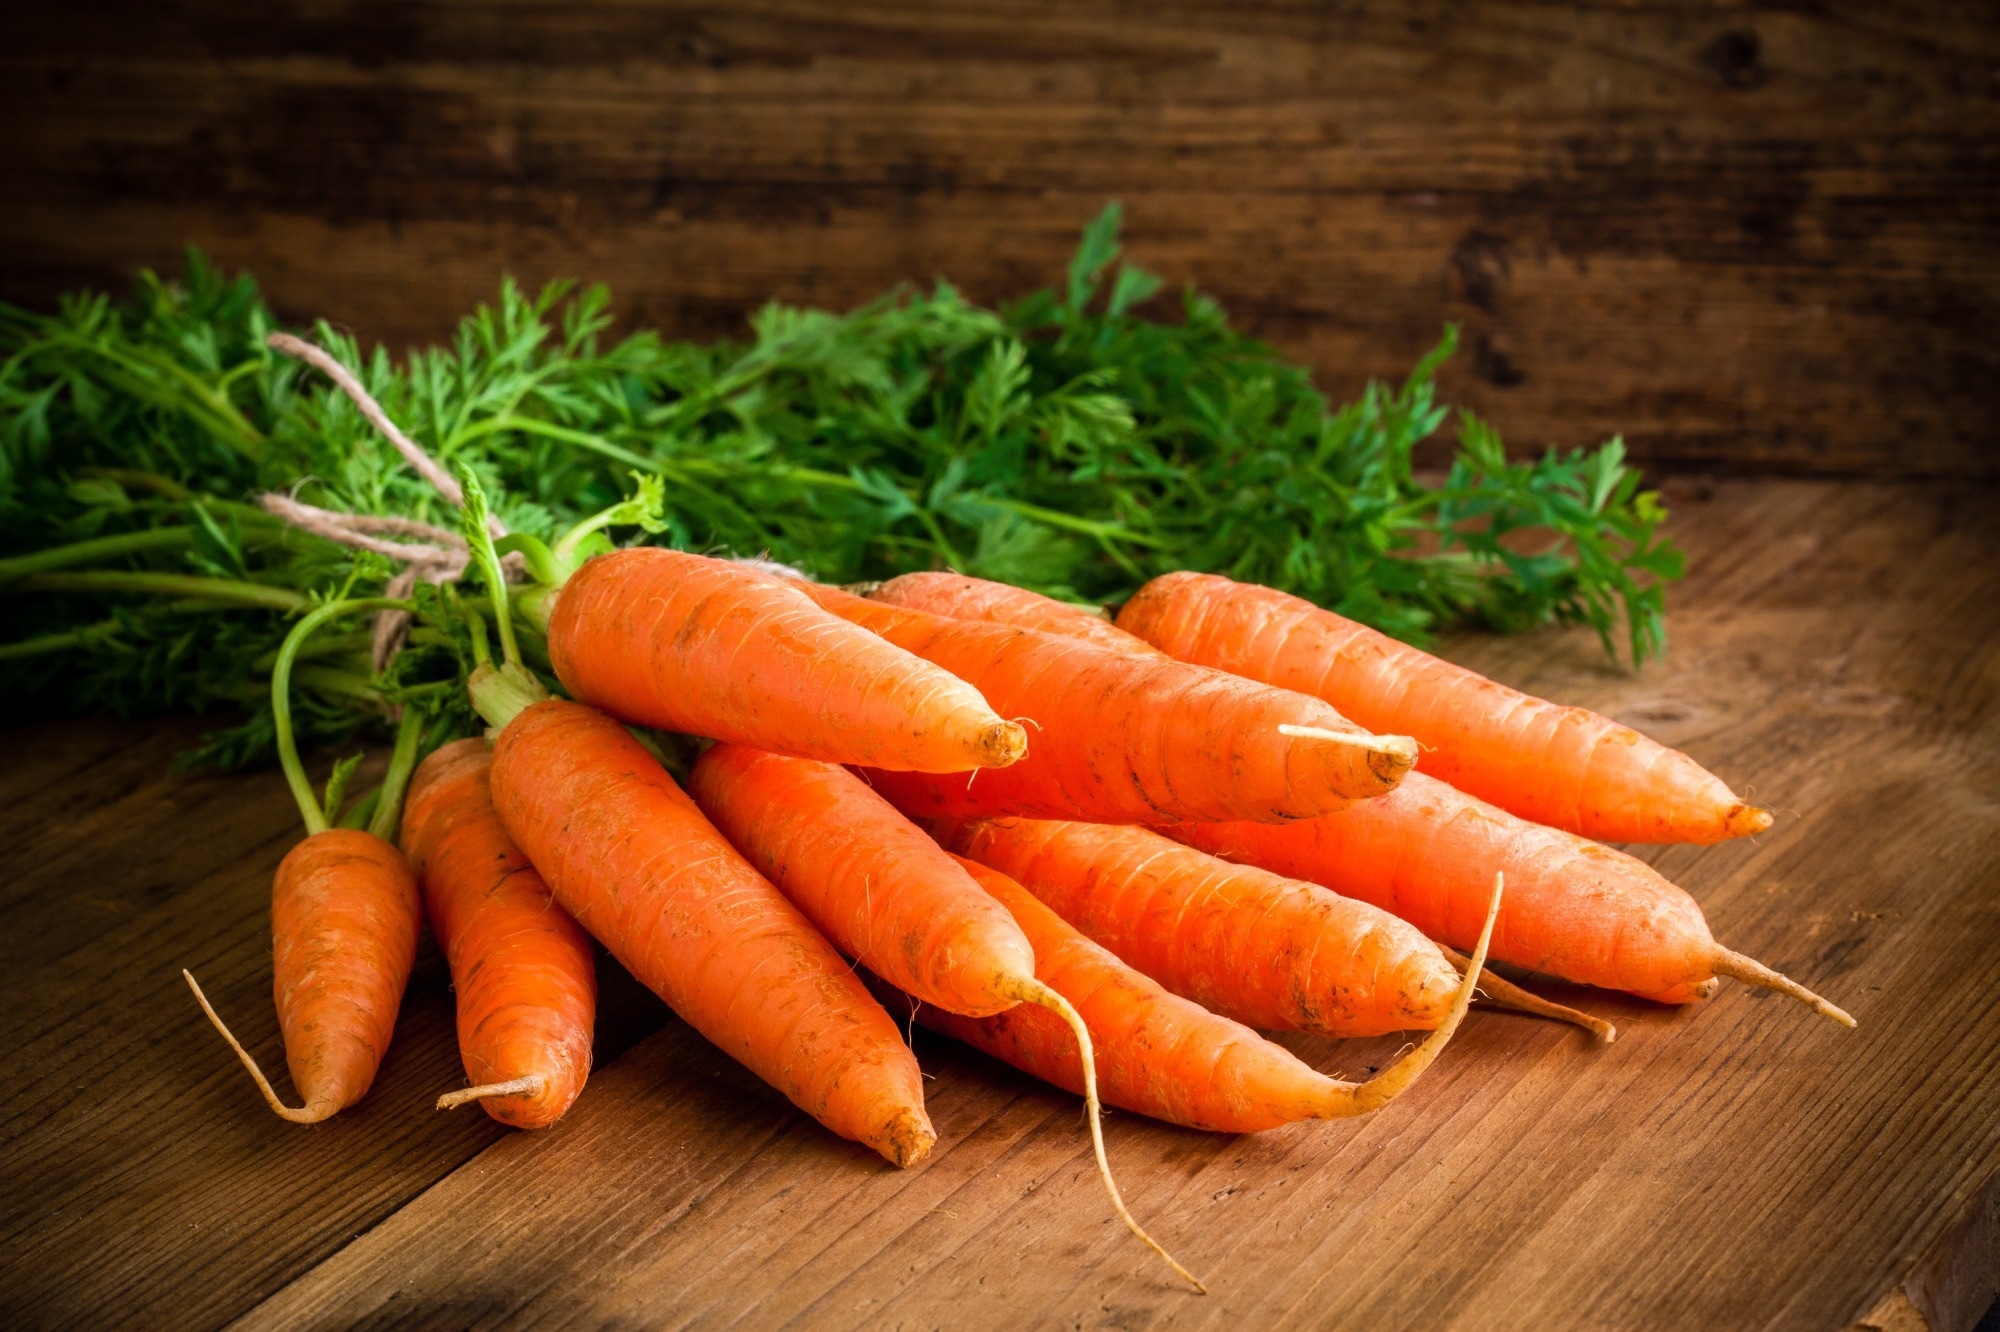 Study: Evaluation of antibacterial properties of nisin peptide expressed in carrots. Image Credit: nblx / shutterstock.com